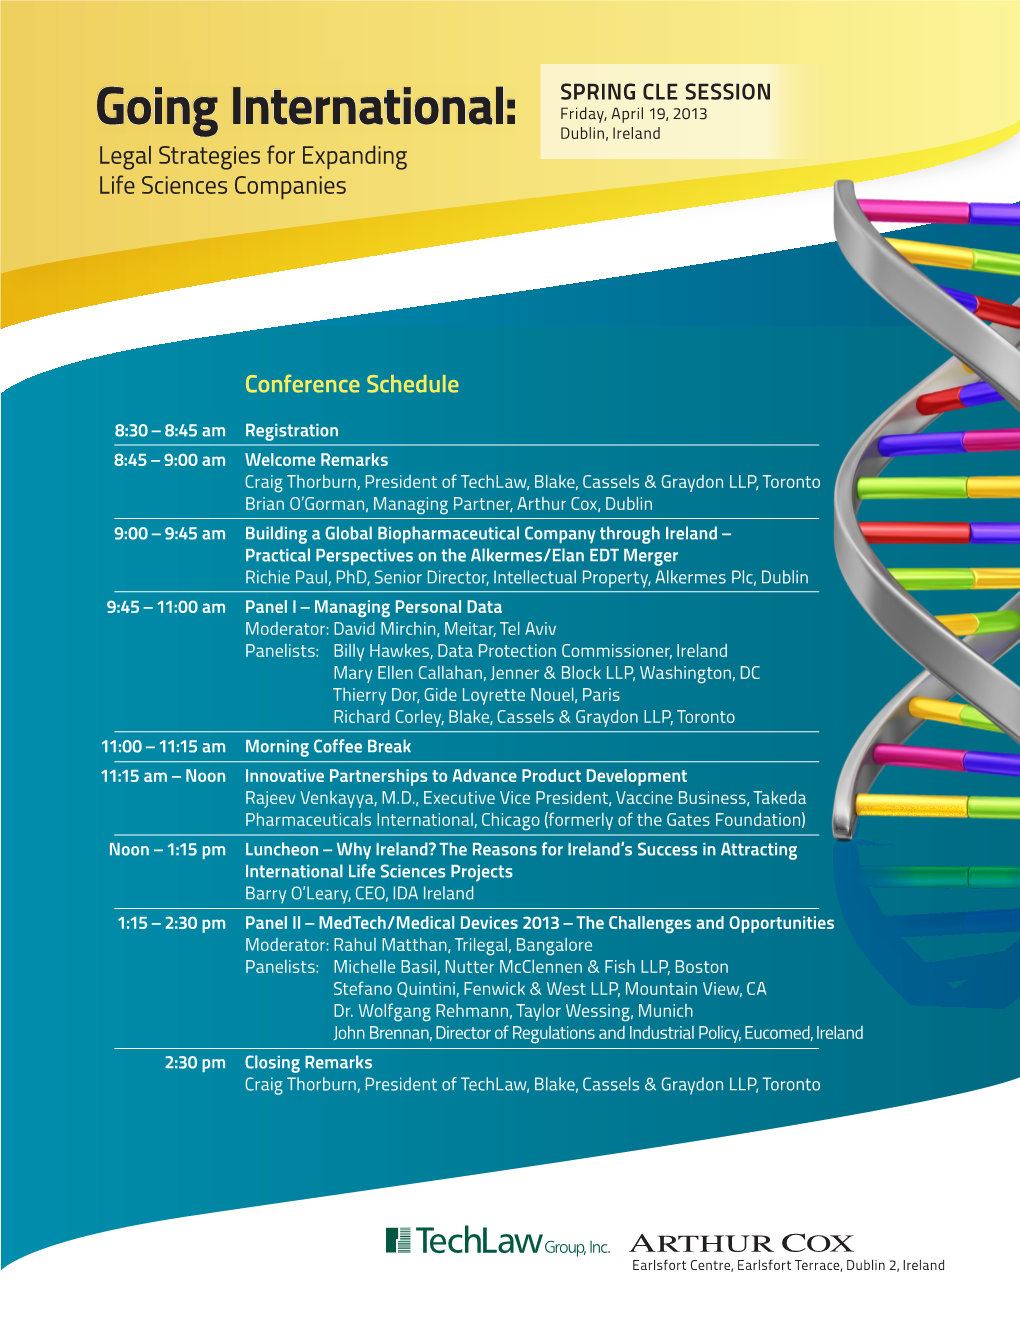 Legal Strategies for Expanding Life Sciences Companies Conference